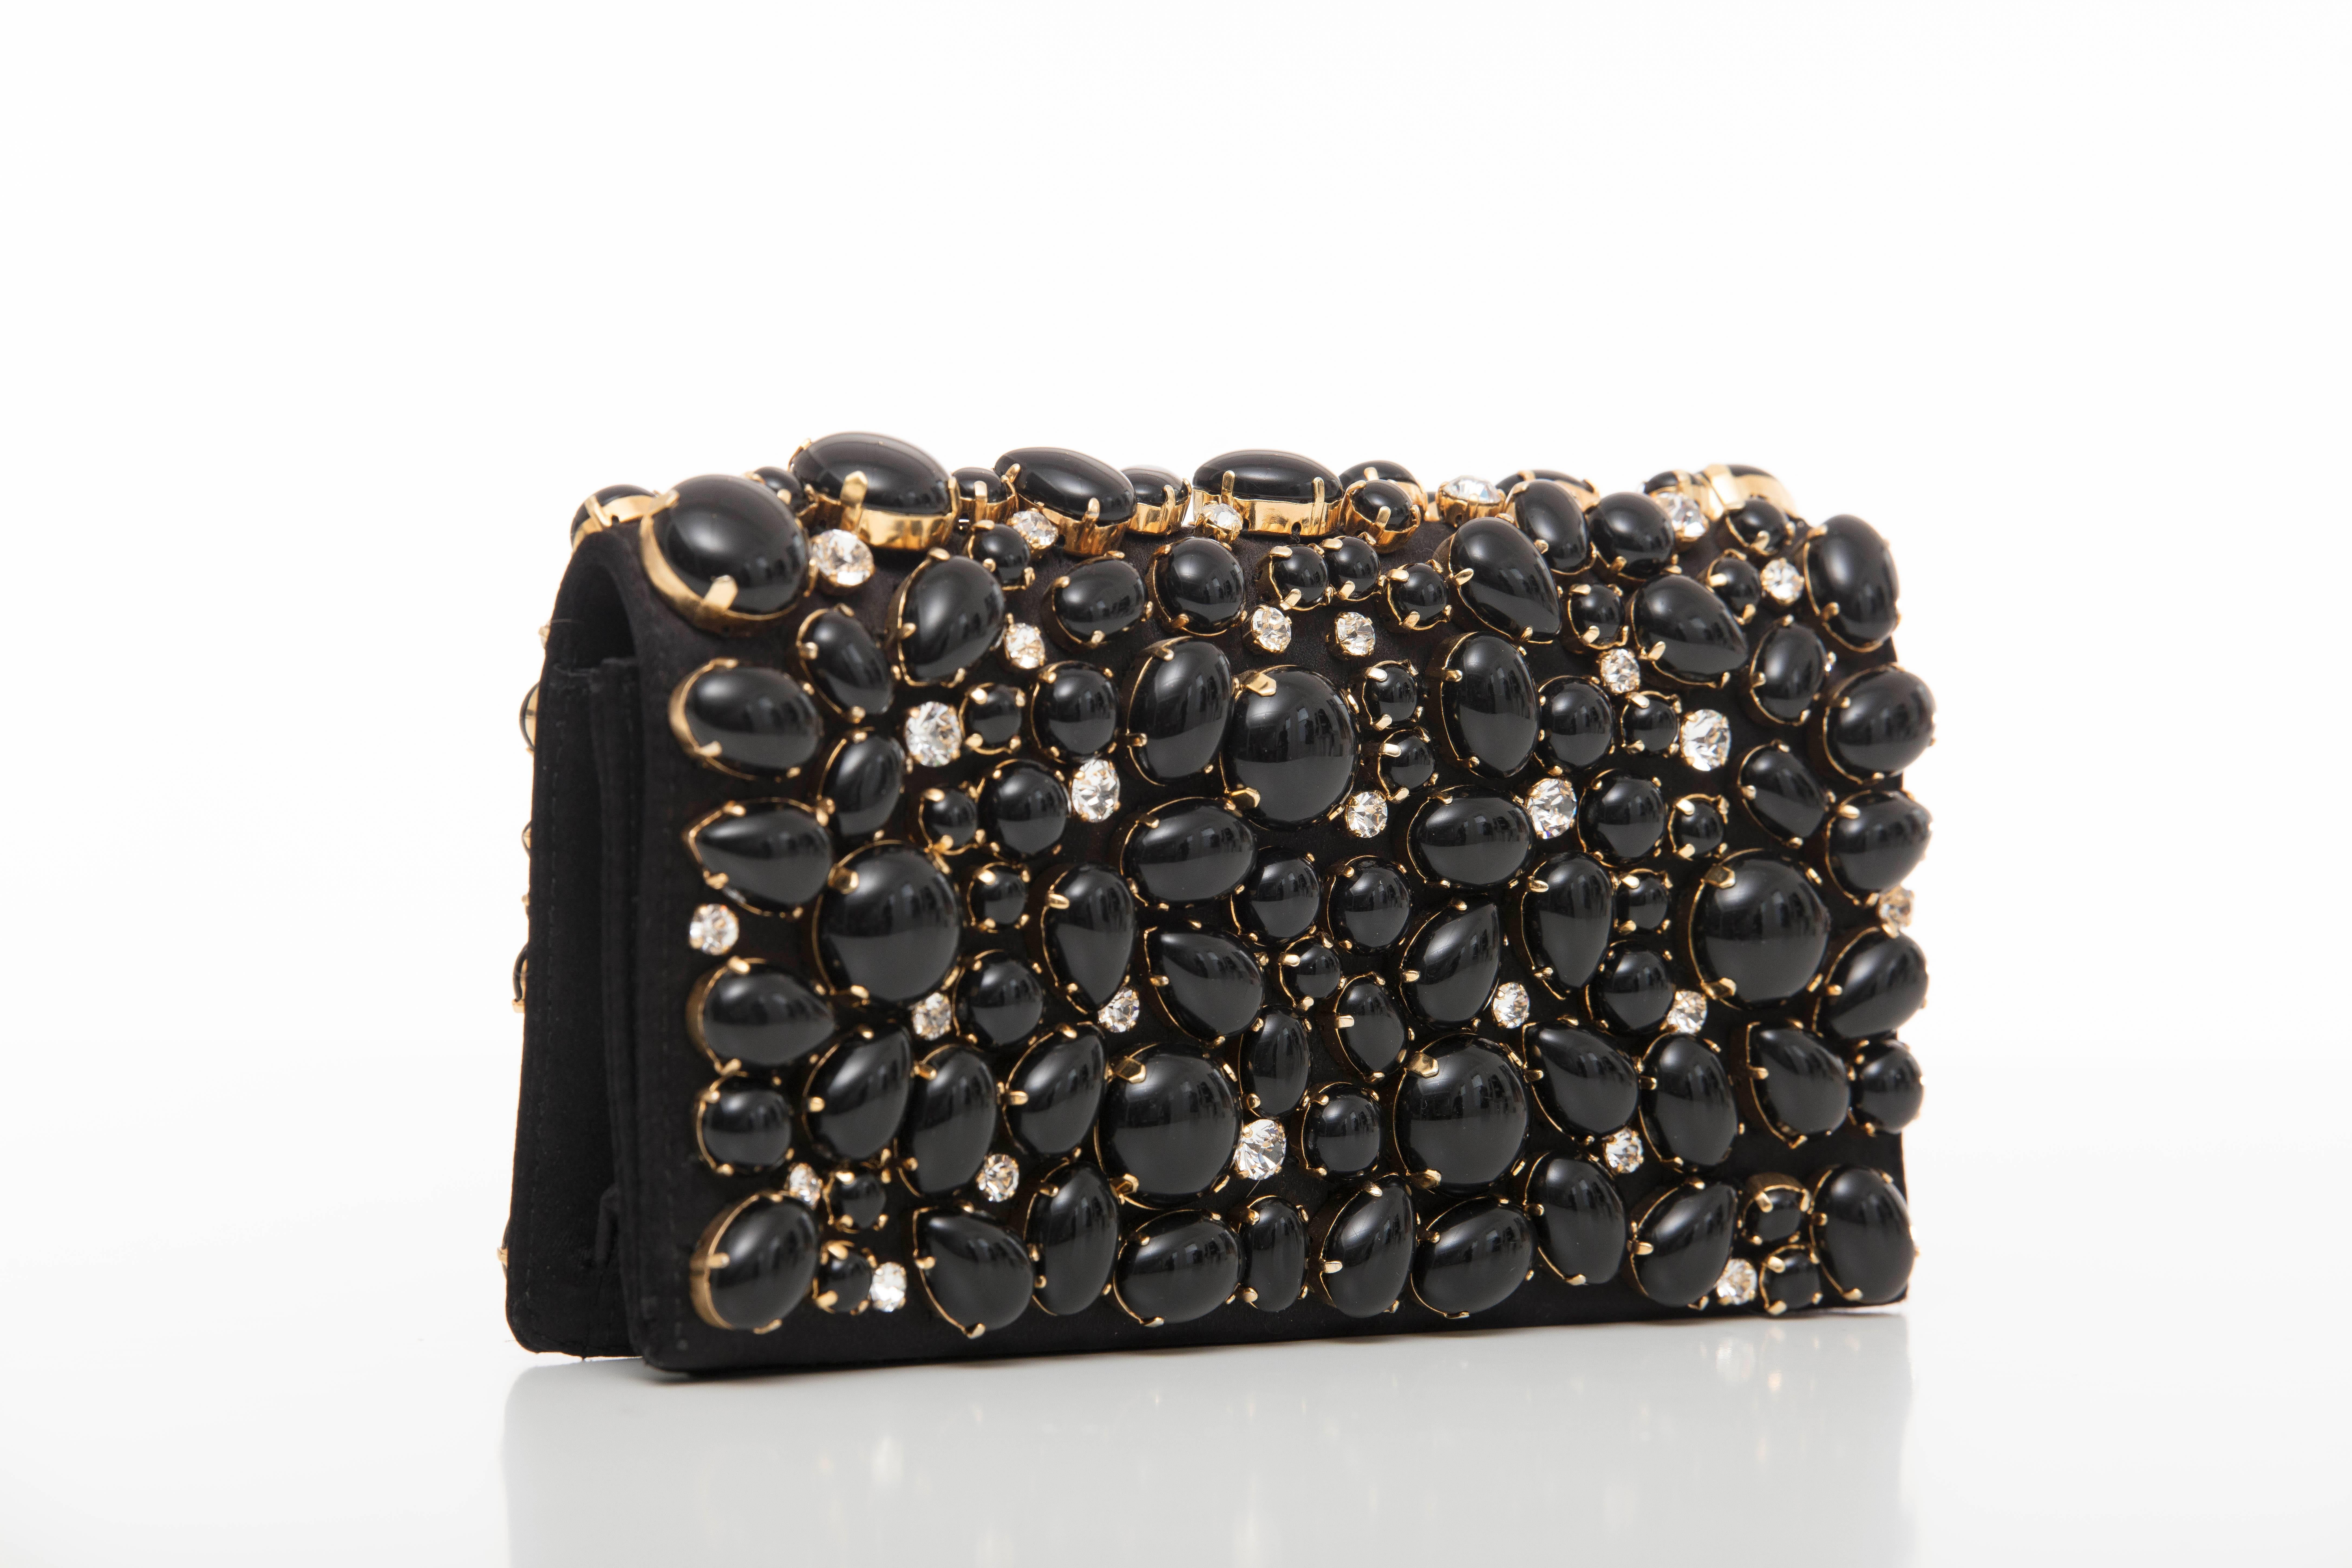 Prada, Spring-Summer 2011, black silk satin Raso Pietre evening clutch with gold-tone hardware, cabochon and prong set crystal embellishments throughout, card slot at interior and magnetic snap closure at front flap.


Height: 4.5, Width 7.5, Depth